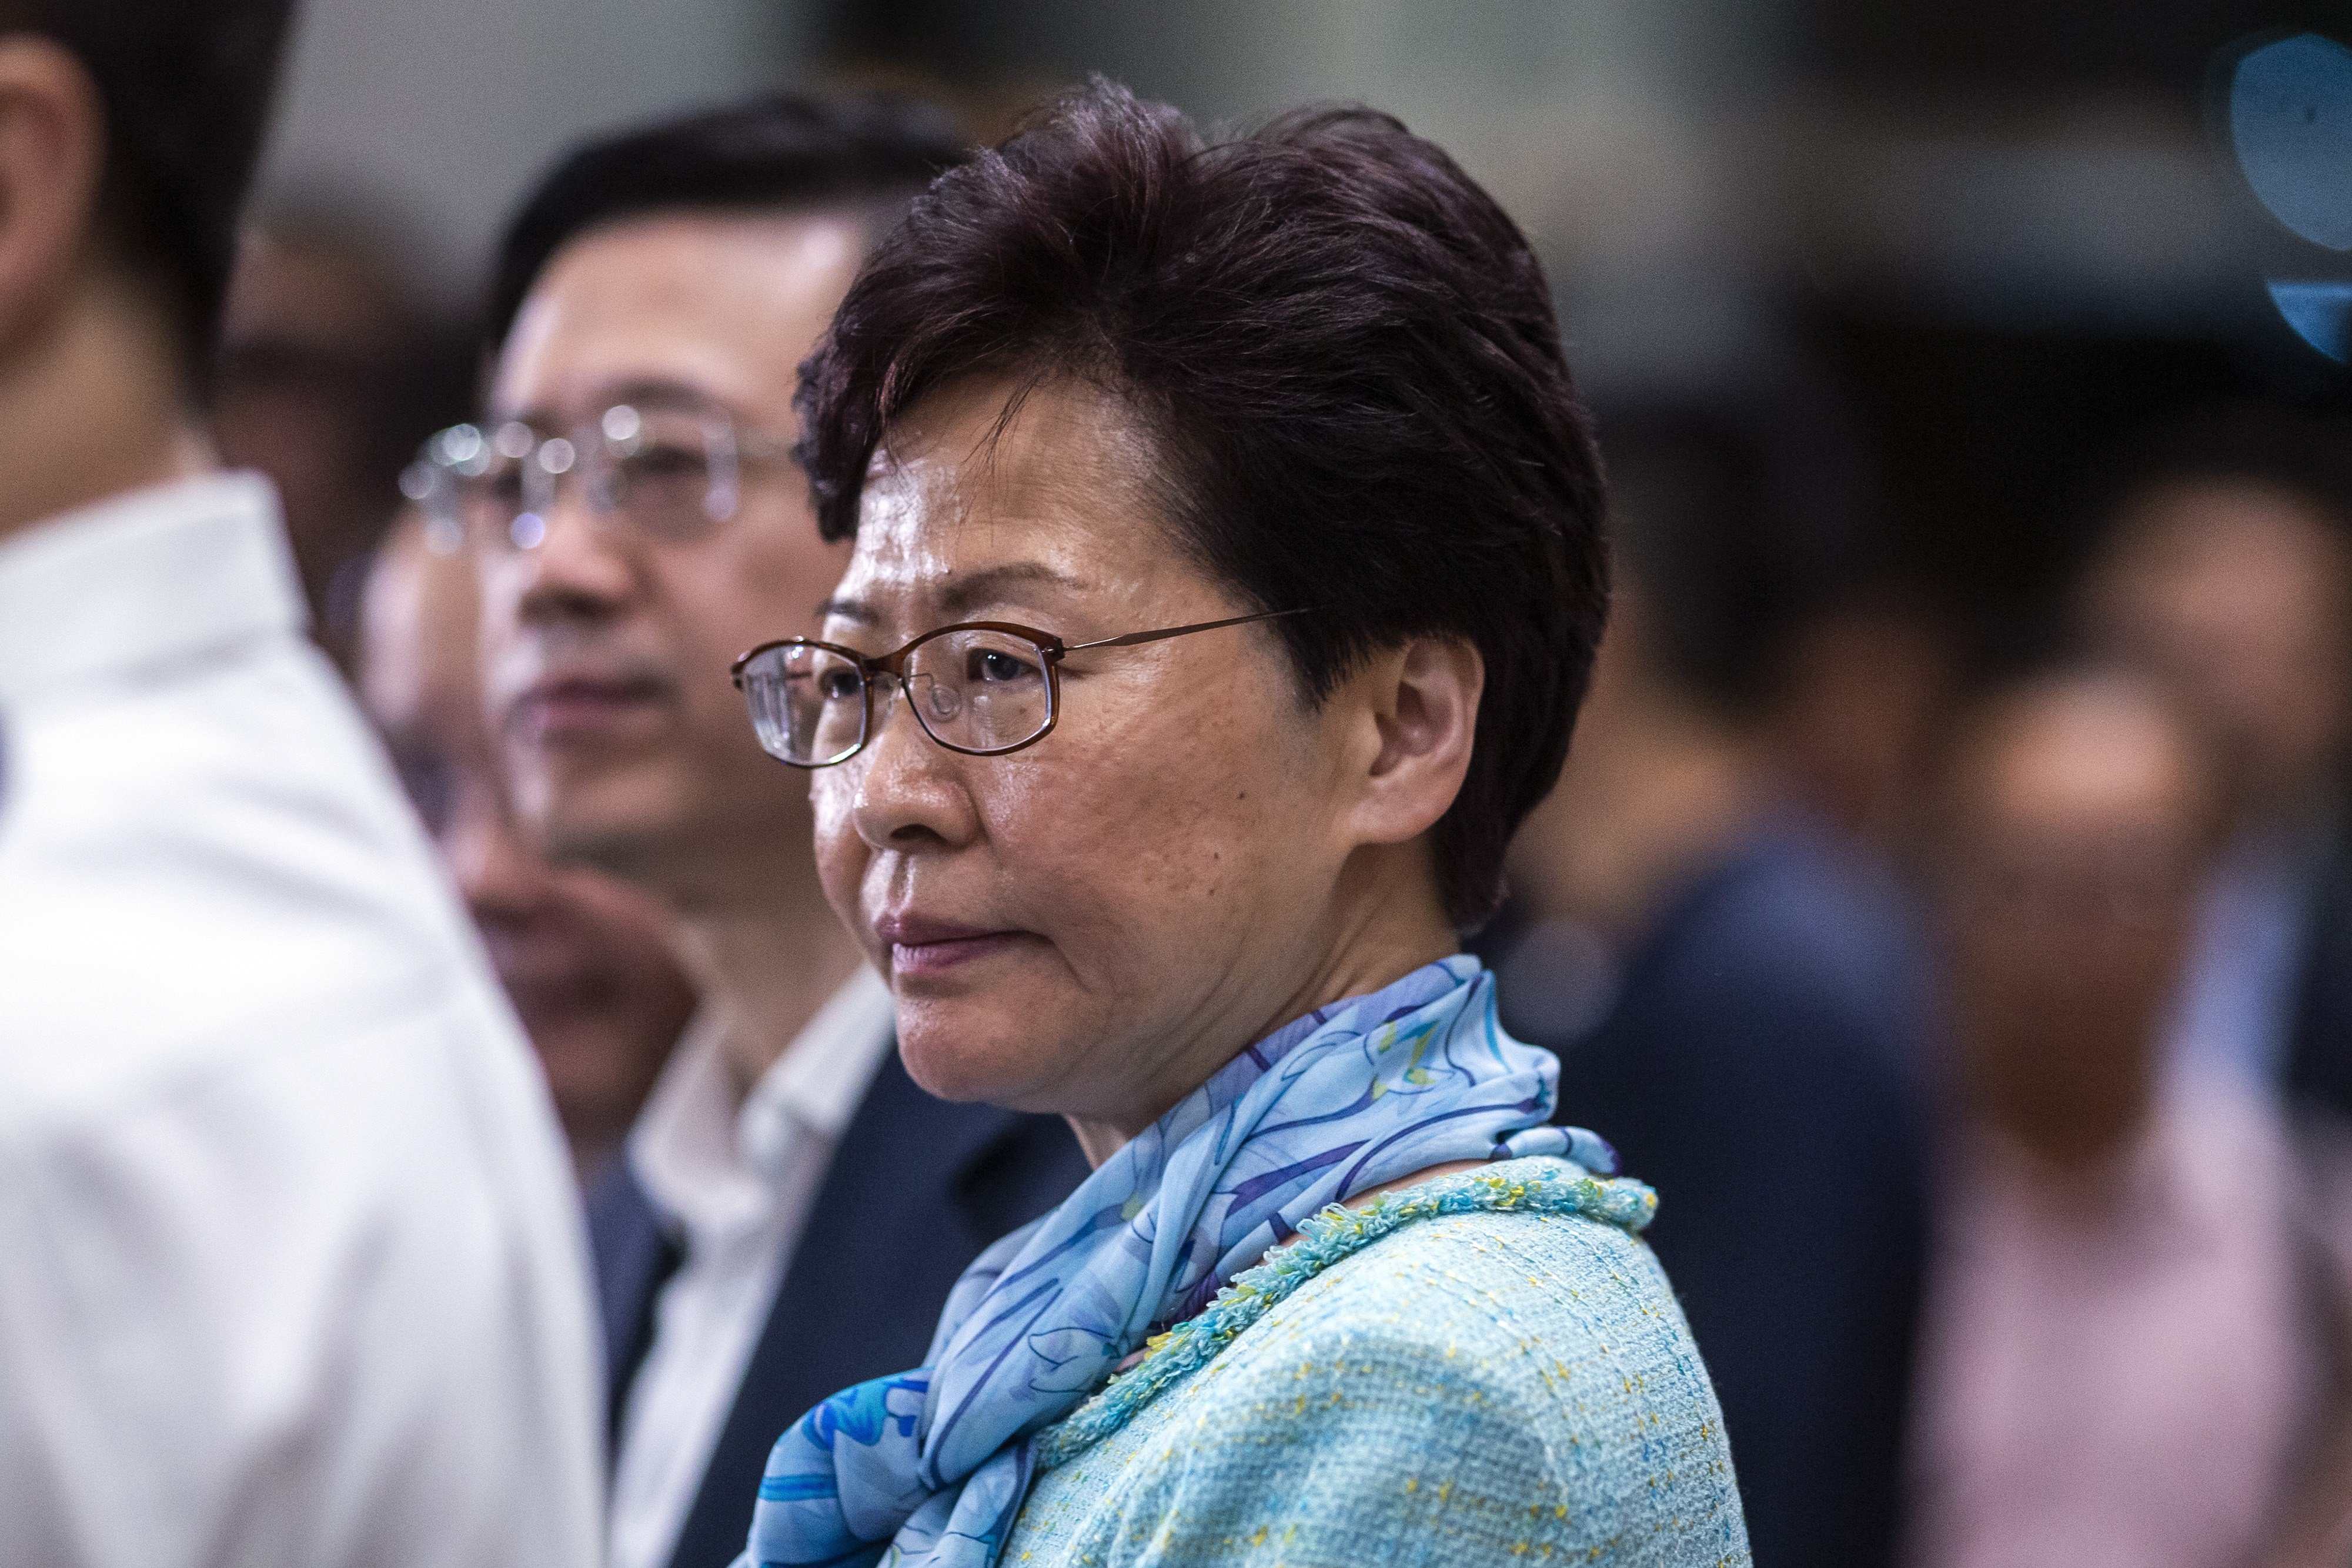 Chief Executive Carrie Lam listens during a news conference in Hong Kong on July 2. Photo: Bloomberg